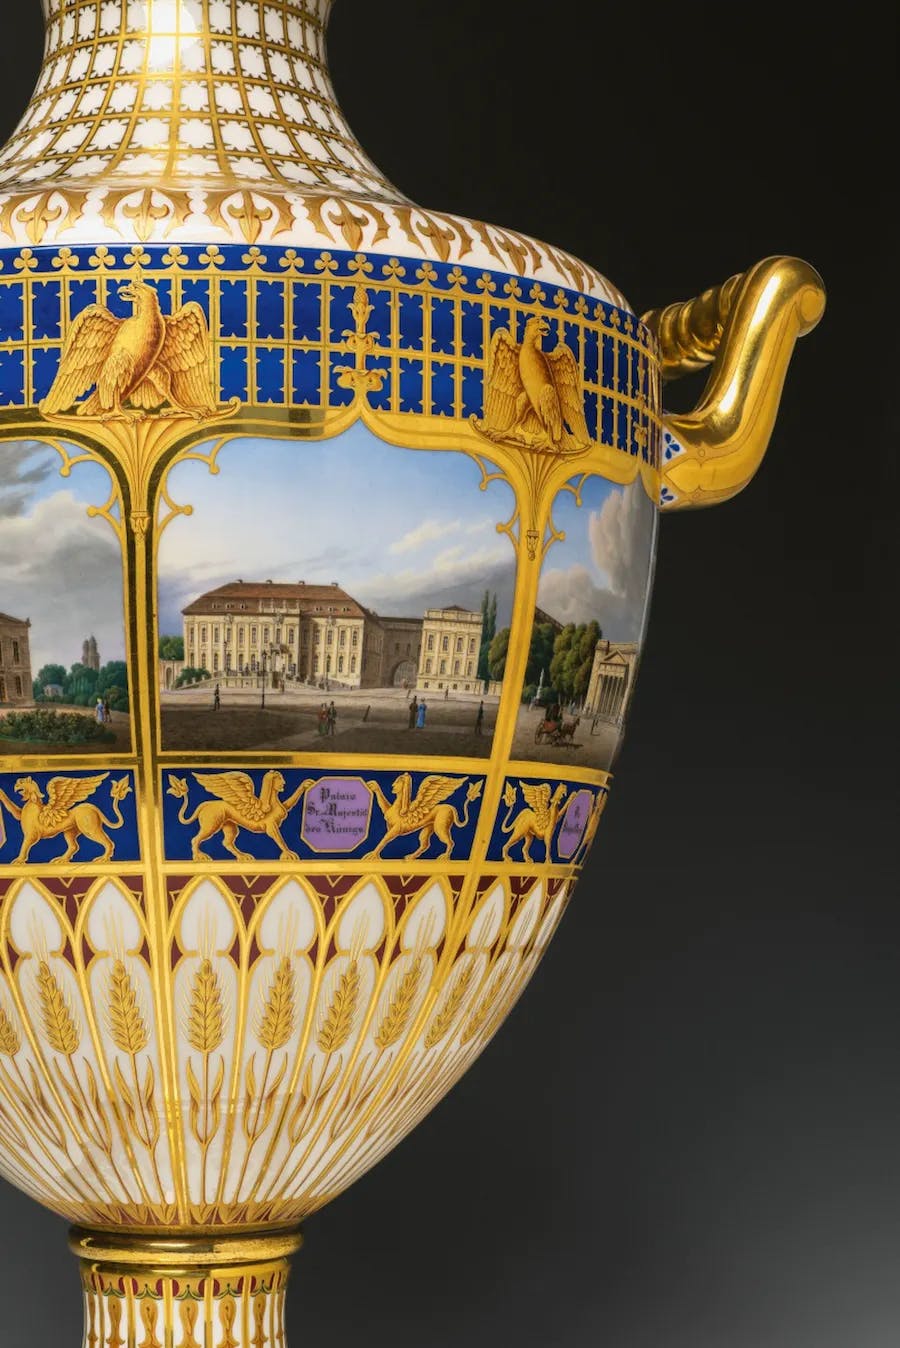 Vase with views of Berlin, gilding and Prussian blue background, design by Carl August Menzel based on models by Carl Daniel Freydanck and Johann Christian August Walter, KPM Berlin, around 1838. Photo © Lempertz
